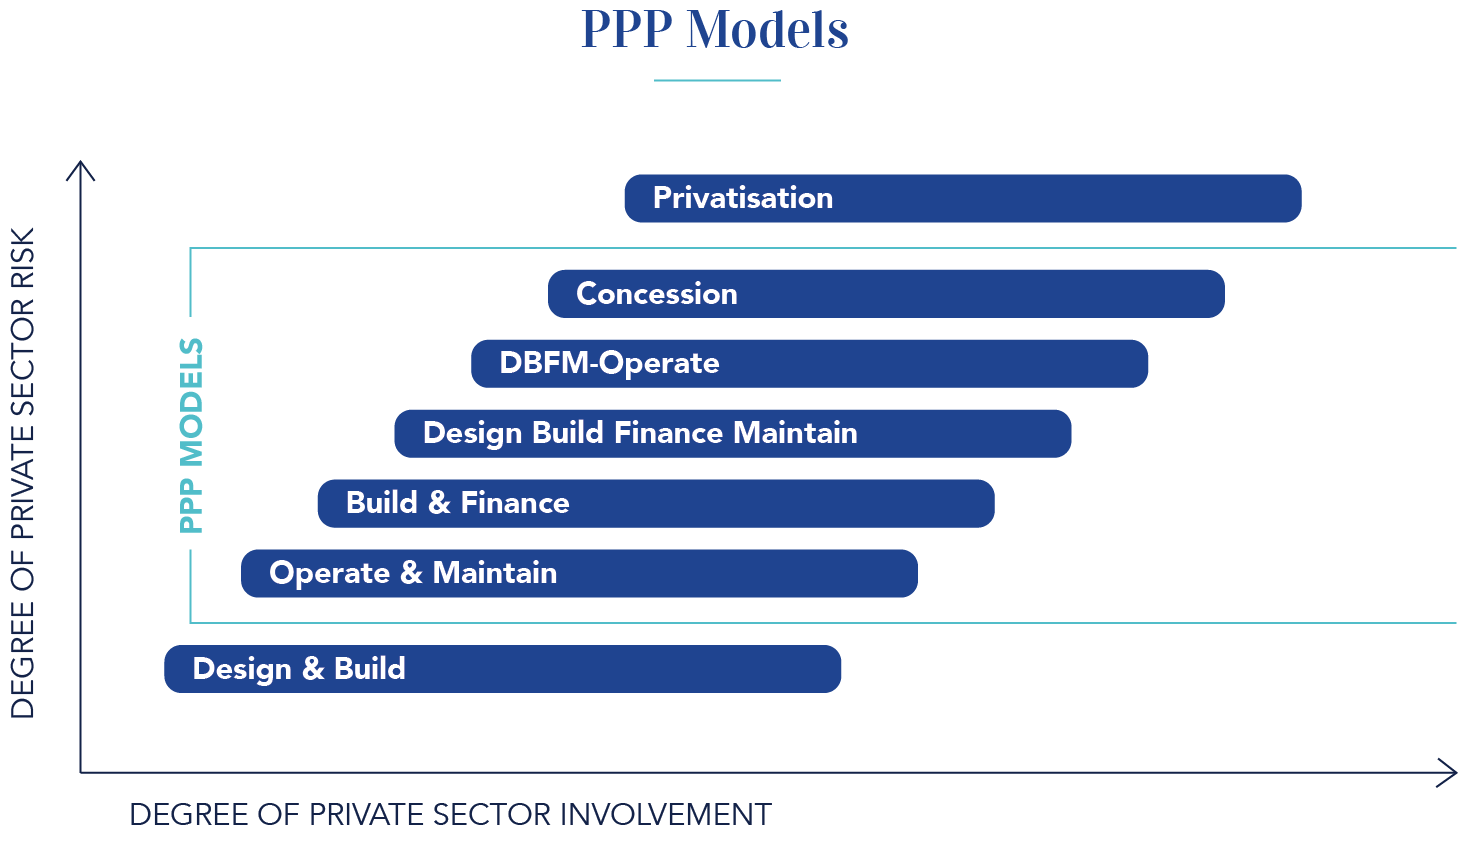 Public-Private Partnership model and its merits in attracting Foreign Direct Investment